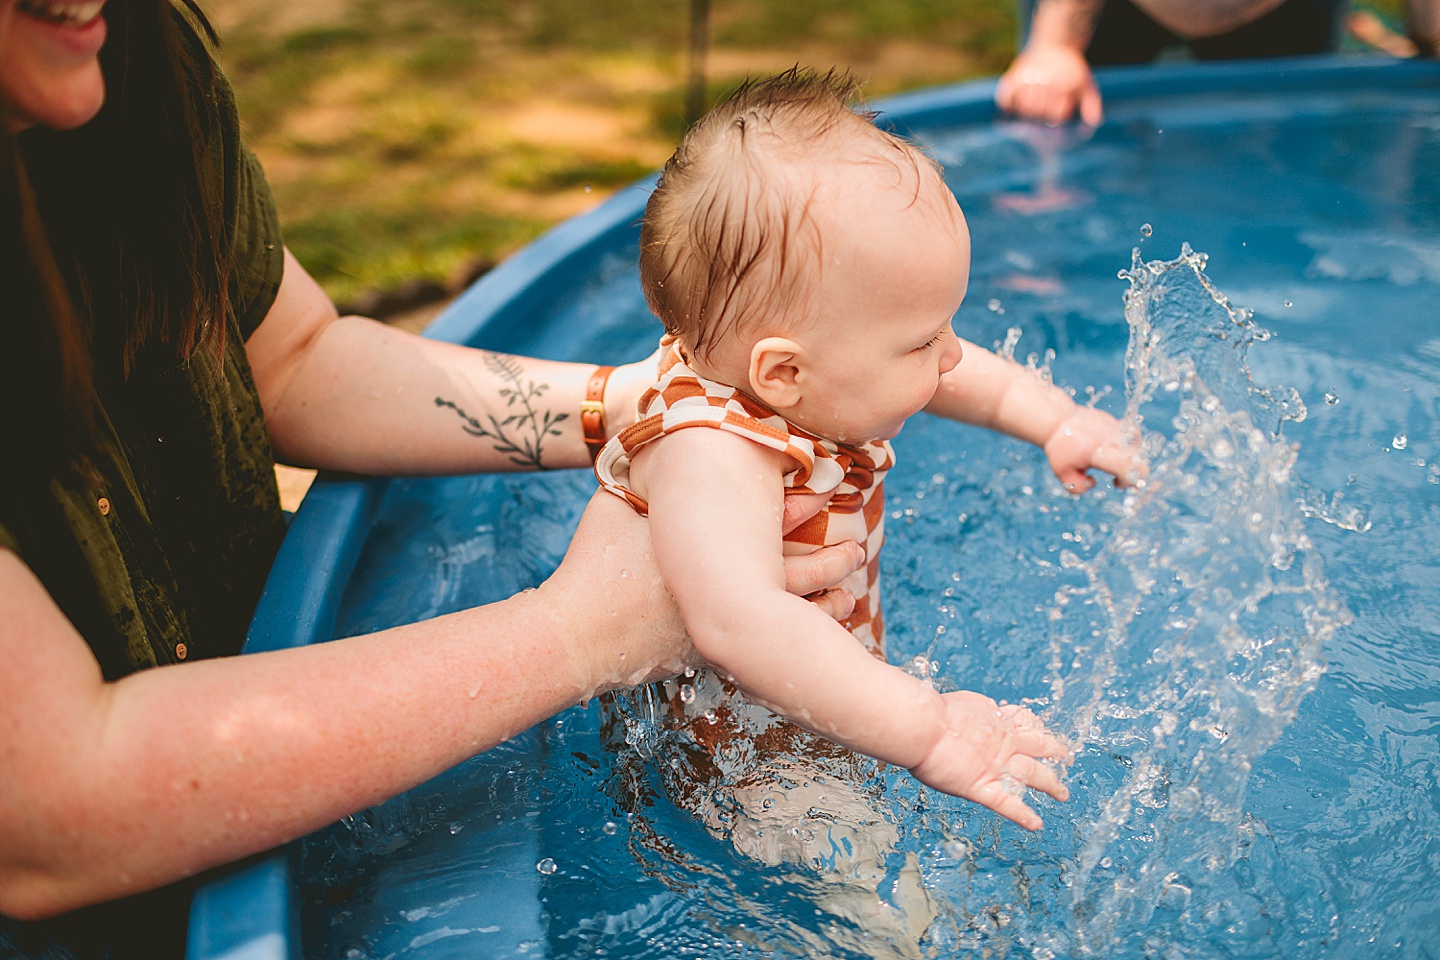 Baby playing in a pool with moms